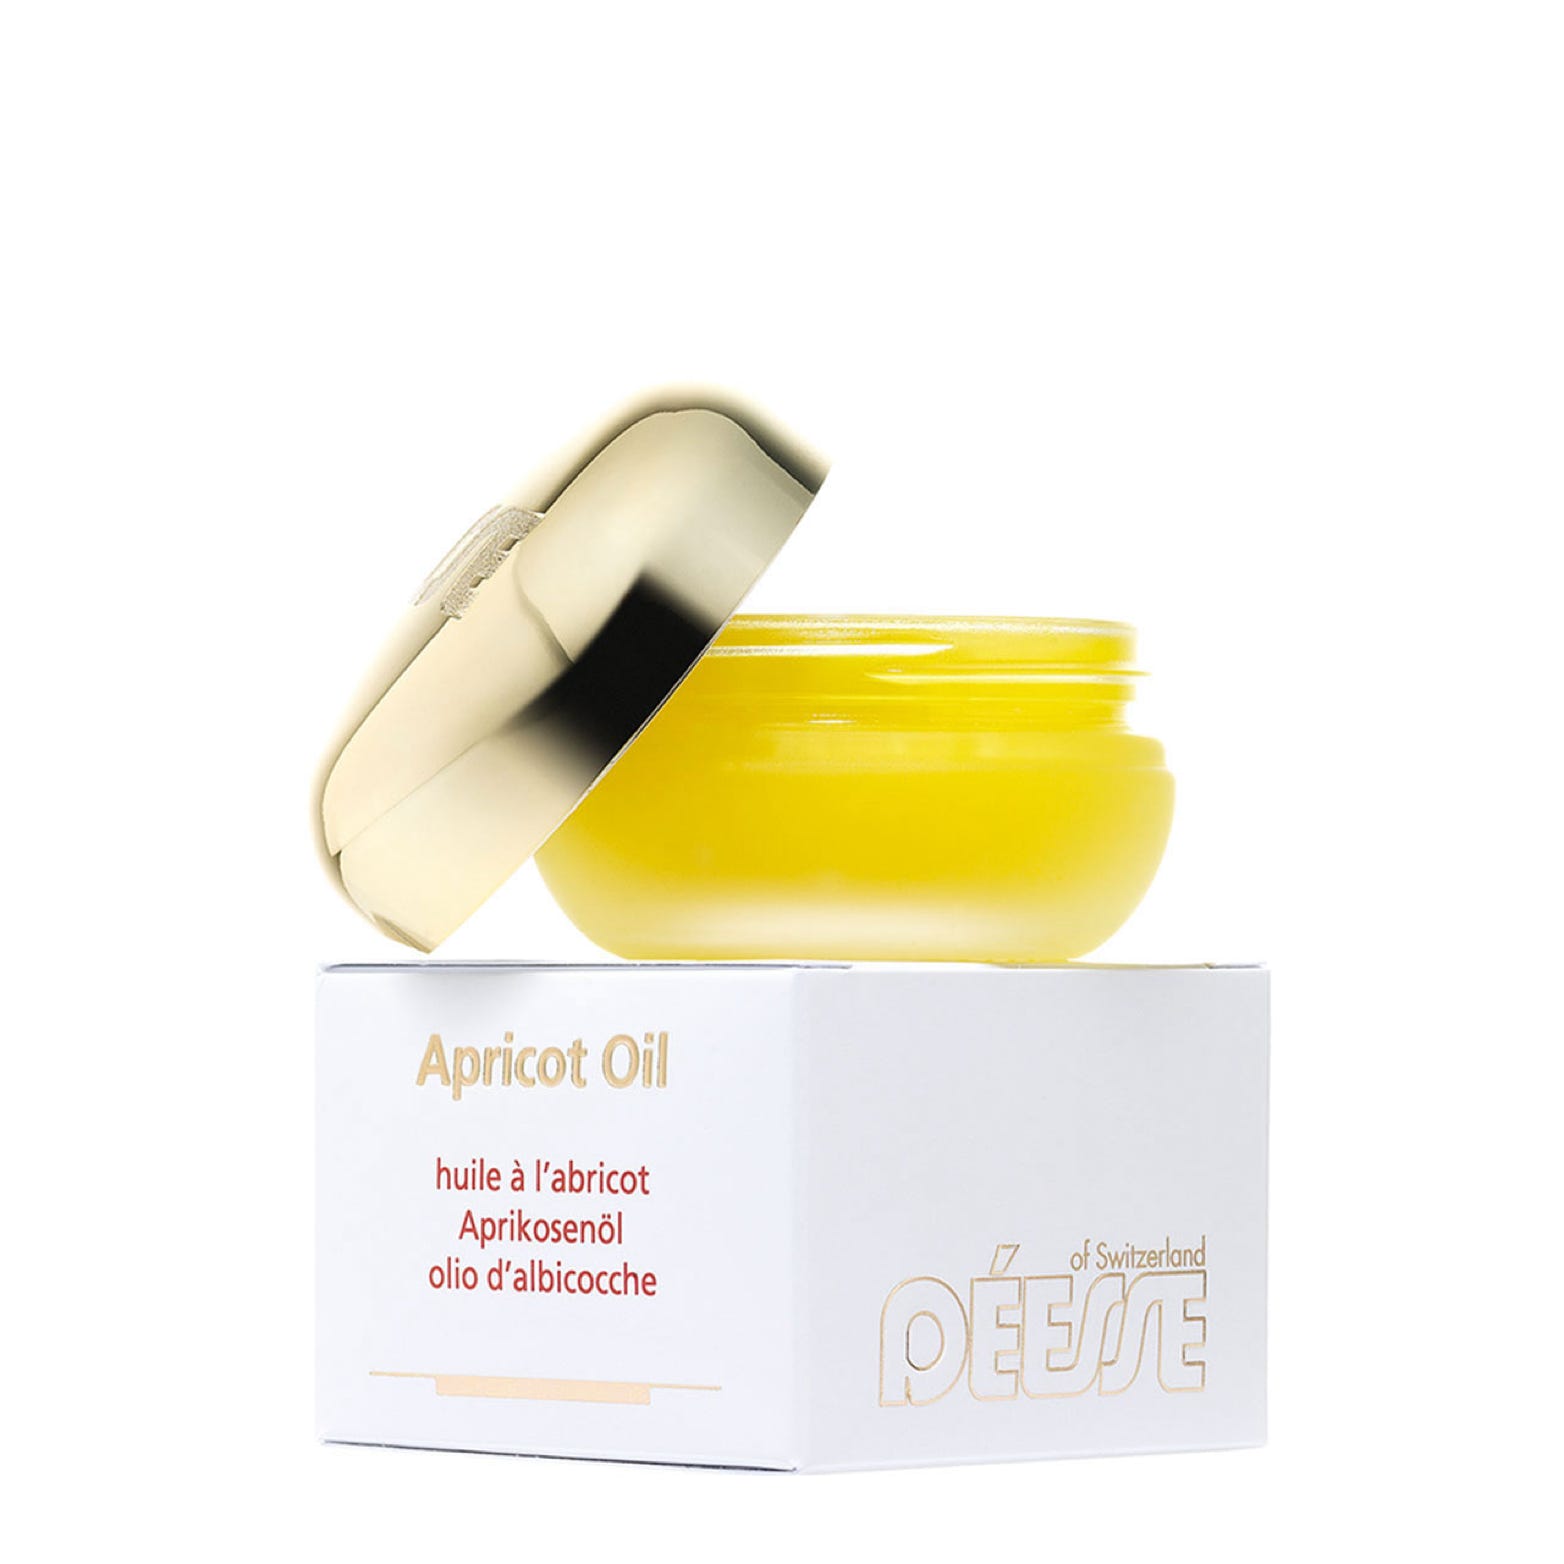 Apricot Oil Cosmed Medical Beauty